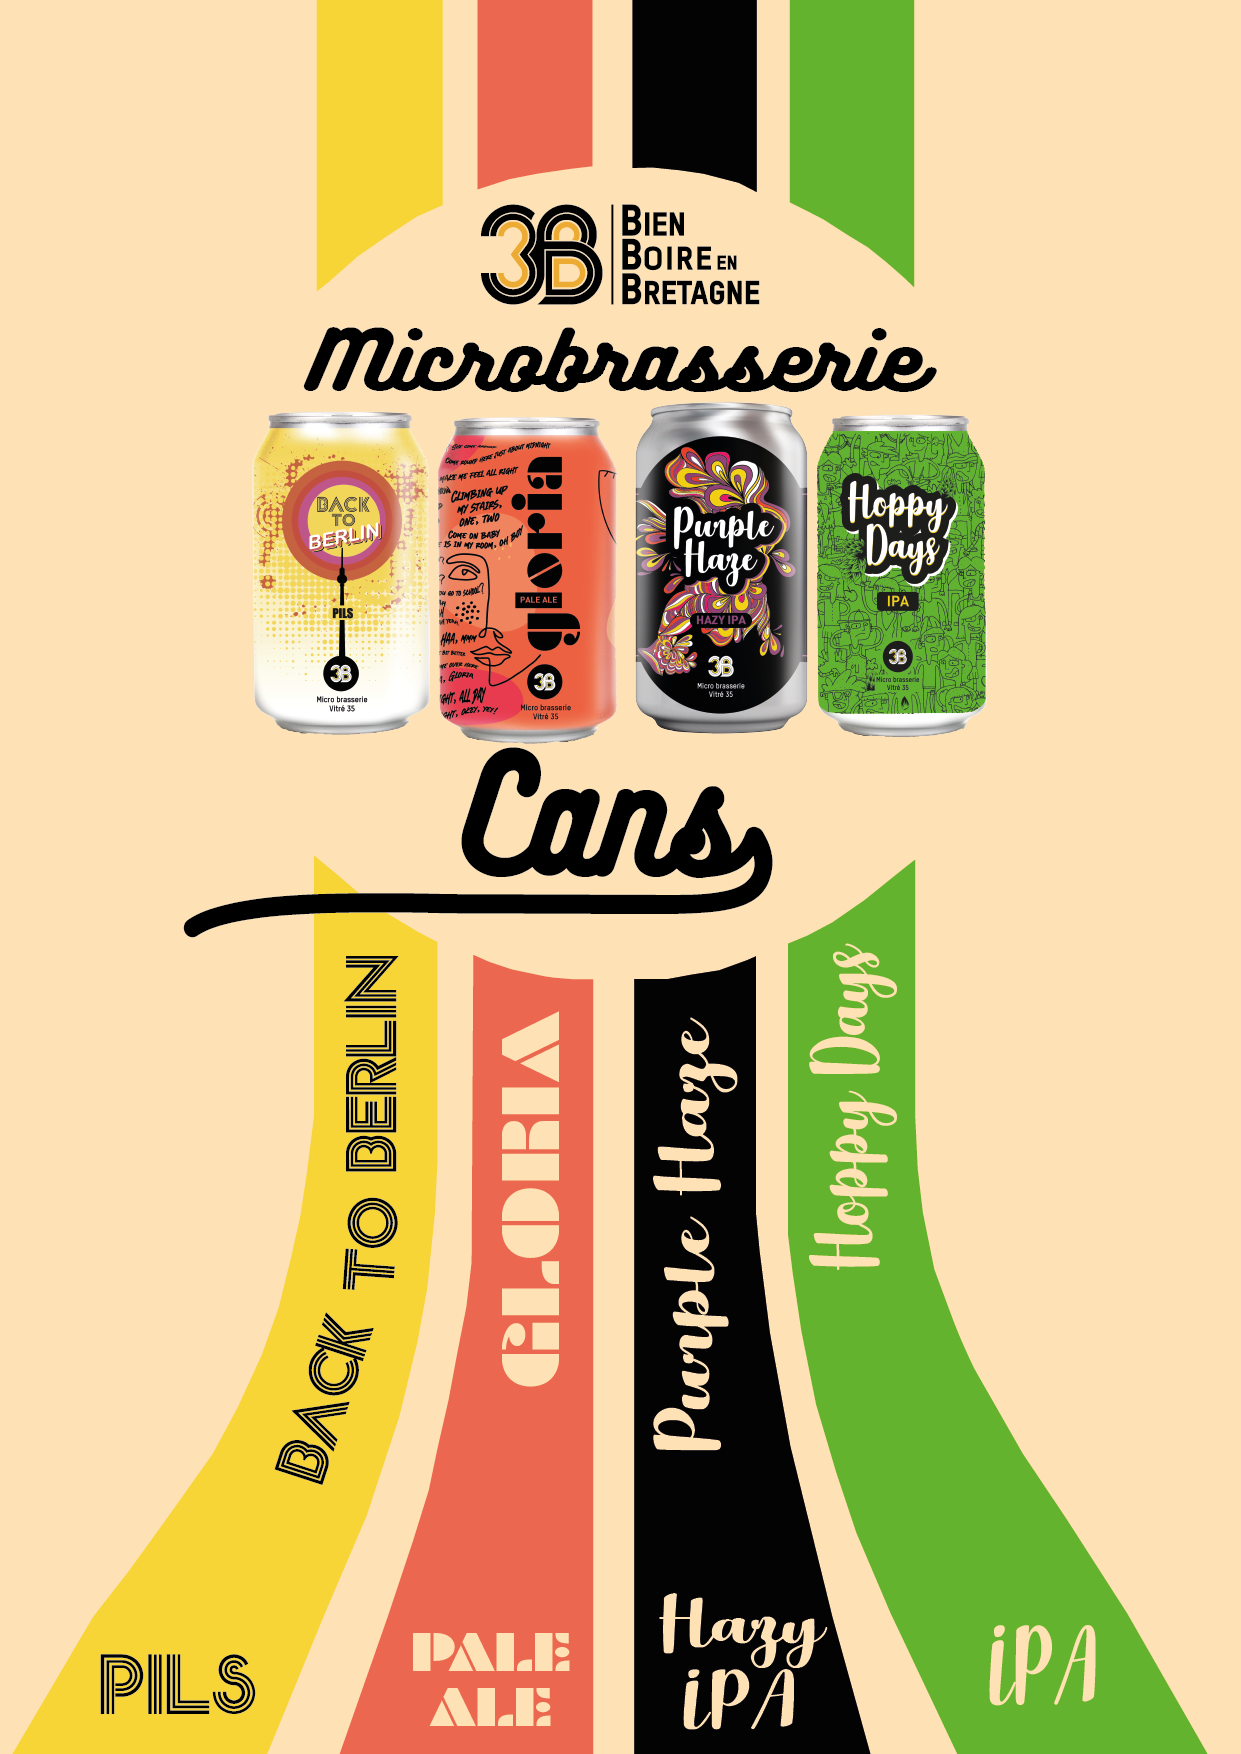 sorties_cans_3b_microbrasserie